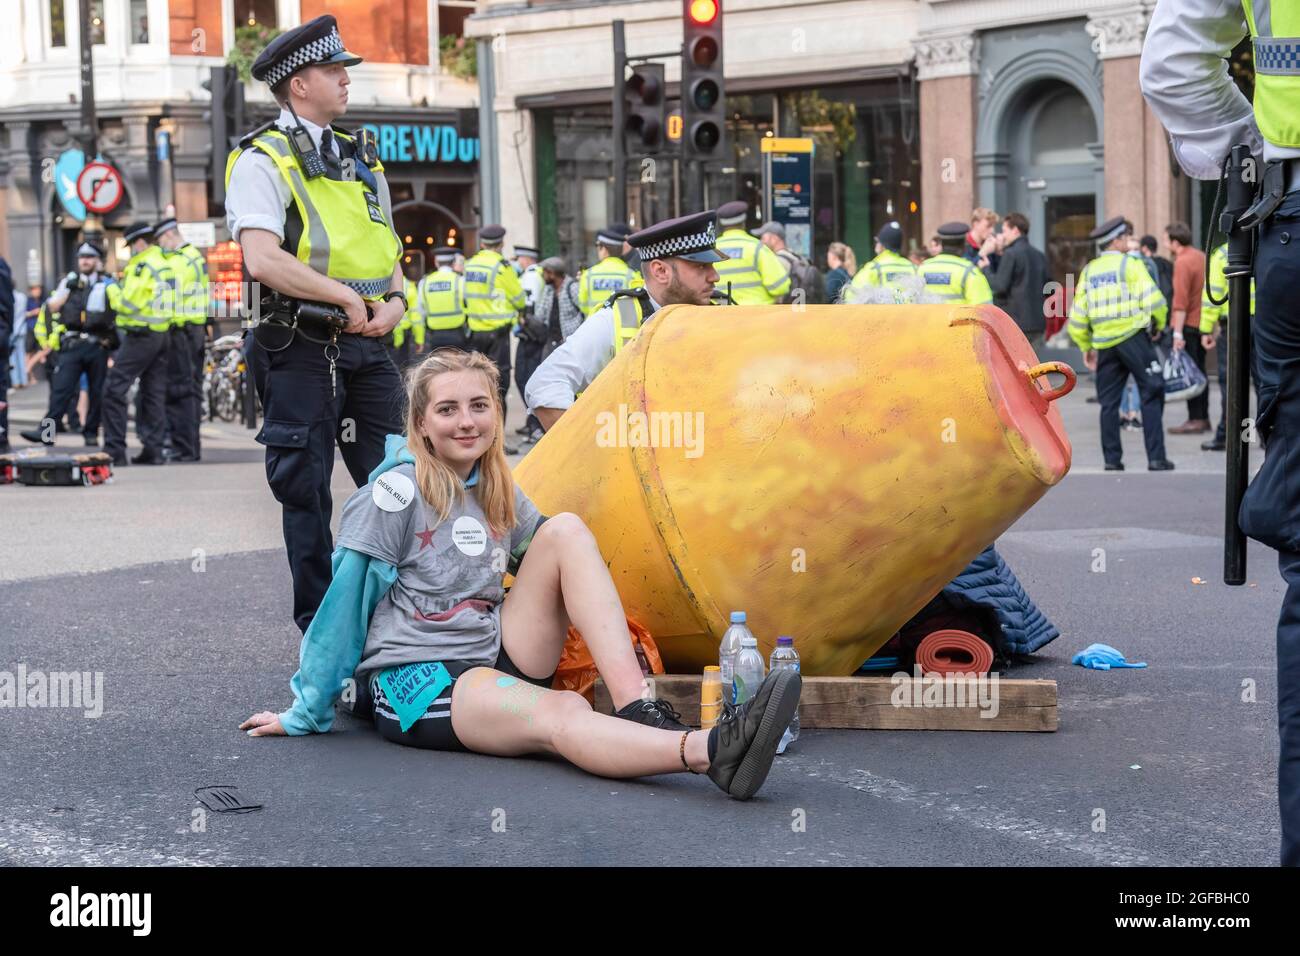 London, UK. 24th Aug, 2021. Protesters chained together at Cambridge Circus during the demonstration.‘The Impossible Rebellion' protest against climate change, global warming, which plans to target the root cause of the climate and ecological crisis and to demand the government divest from fossil fuel companies by Extinction Rebellion. Credit: SOPA Images Limited/Alamy Live News Stock Photo